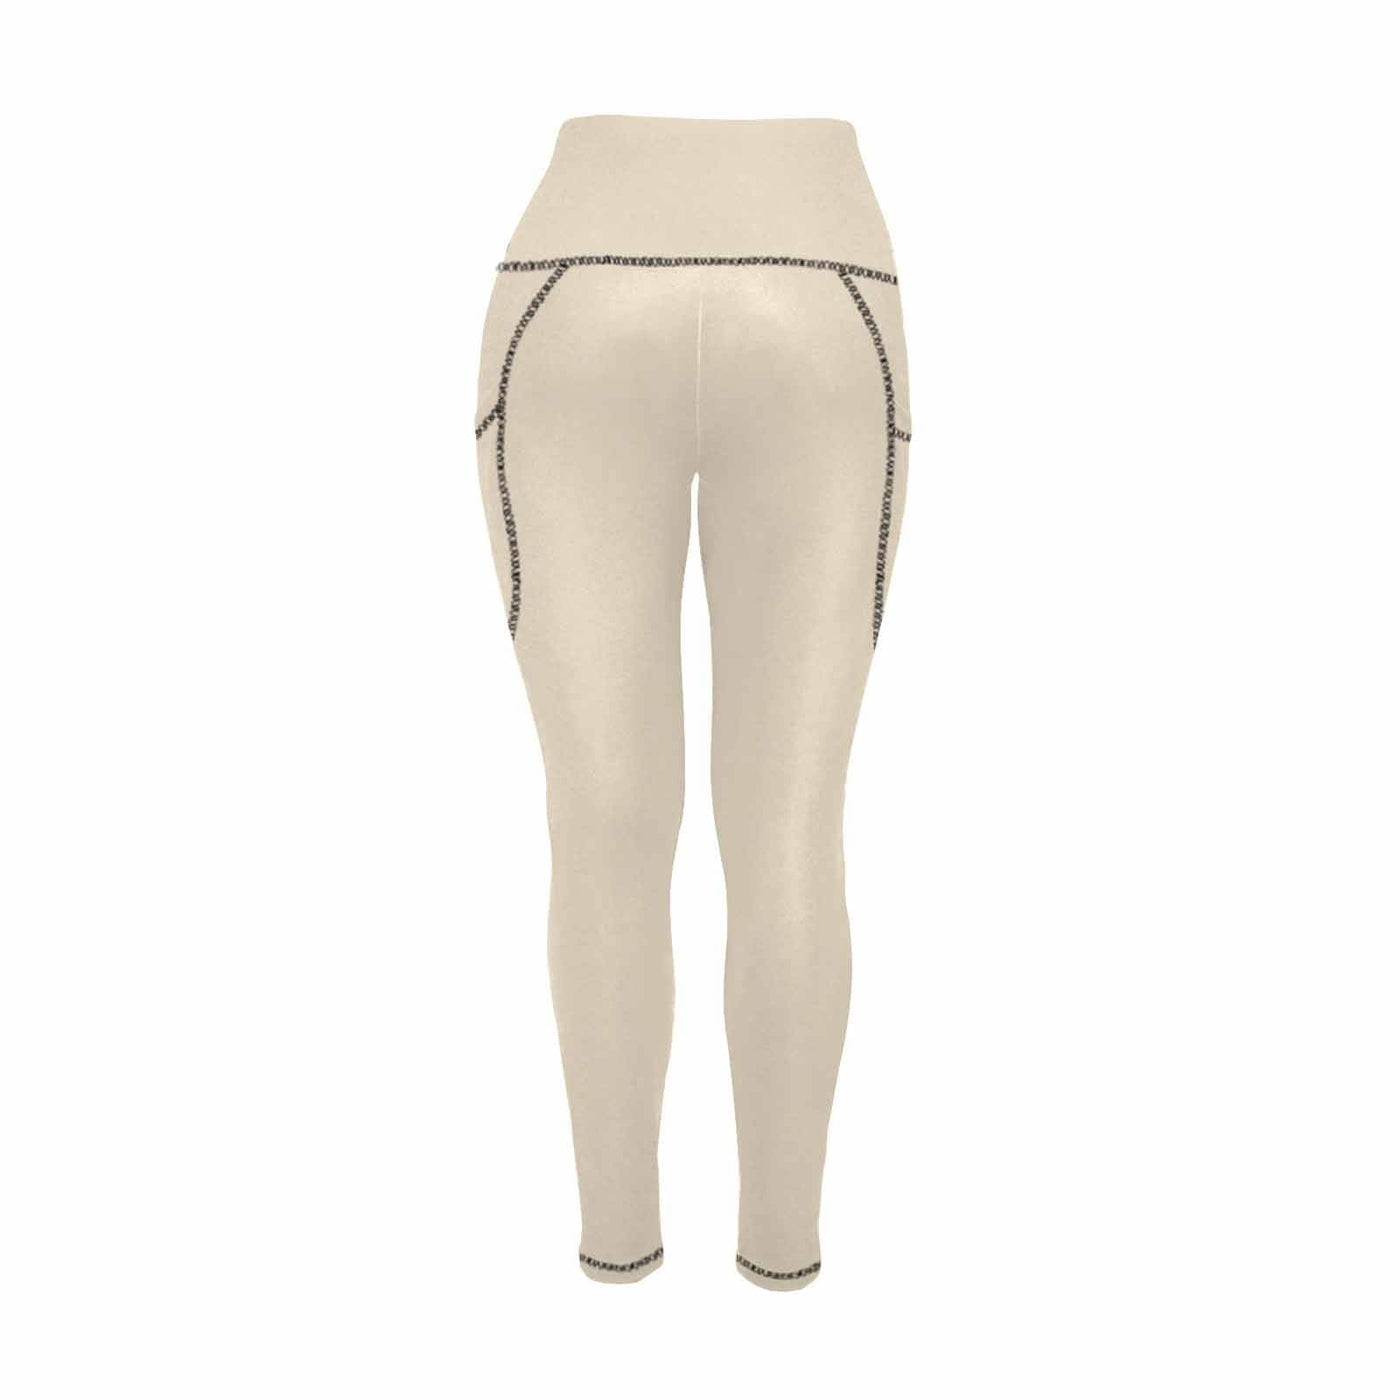 Womens Leggings With Pockets - Fitness Pants / Champagne Beige - Womens